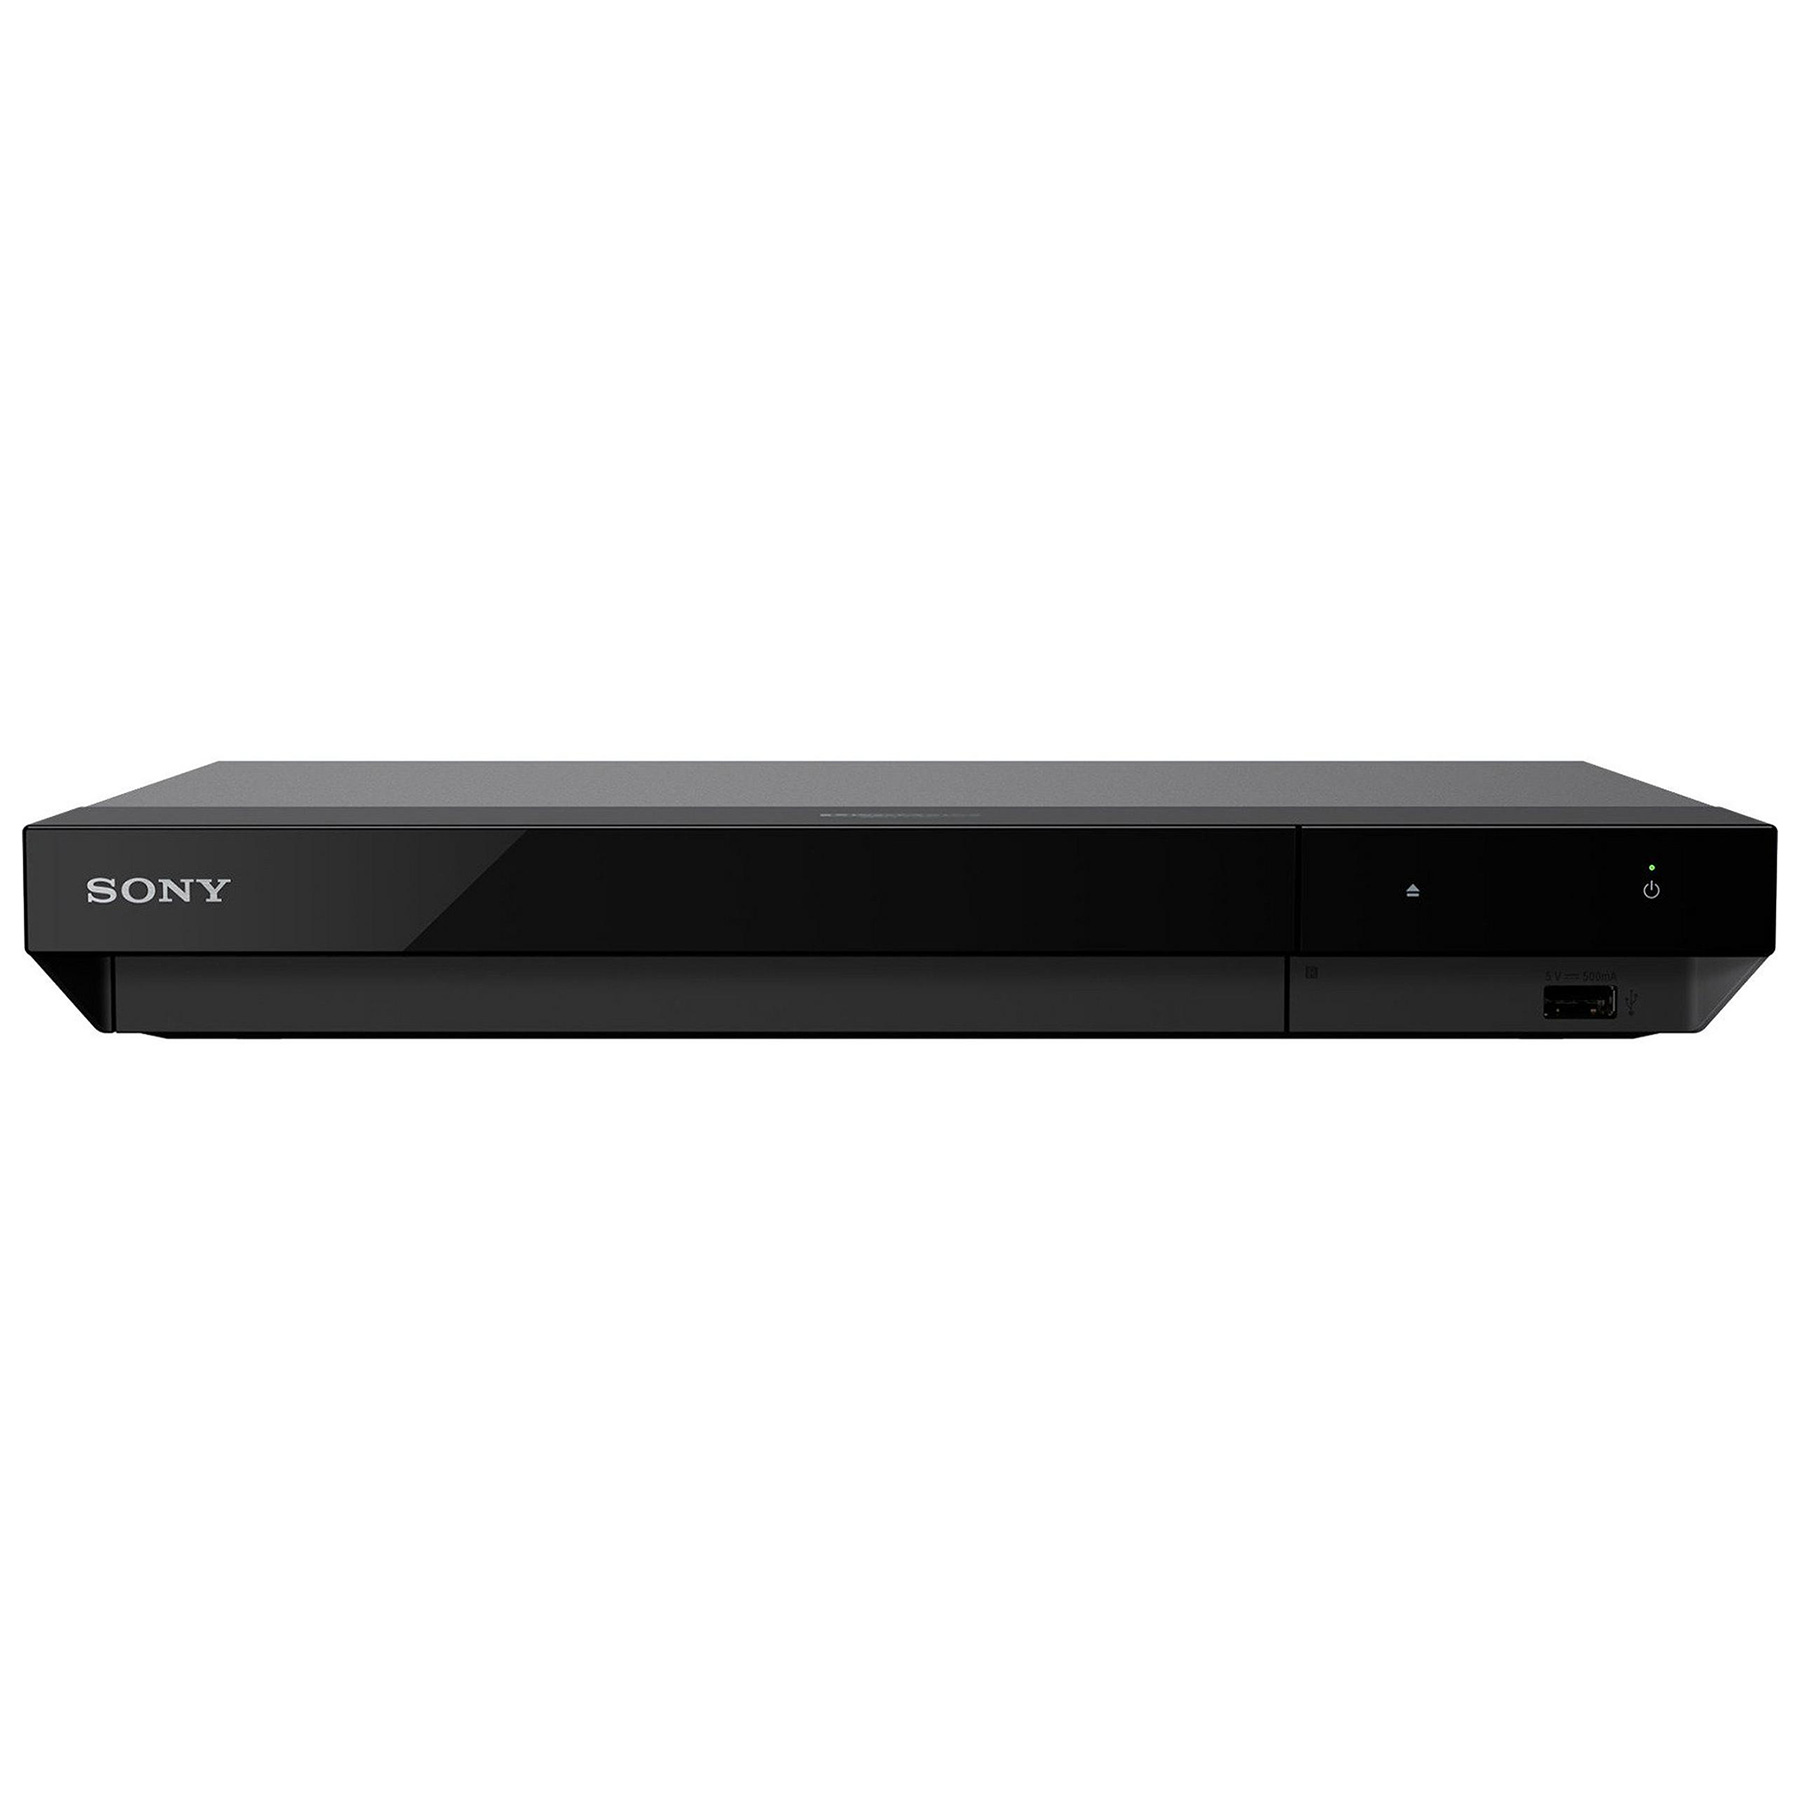 Image of Sony UBPX700B 4K HDR Ultra HD Smart Blu Ray Player with Dolby Vision